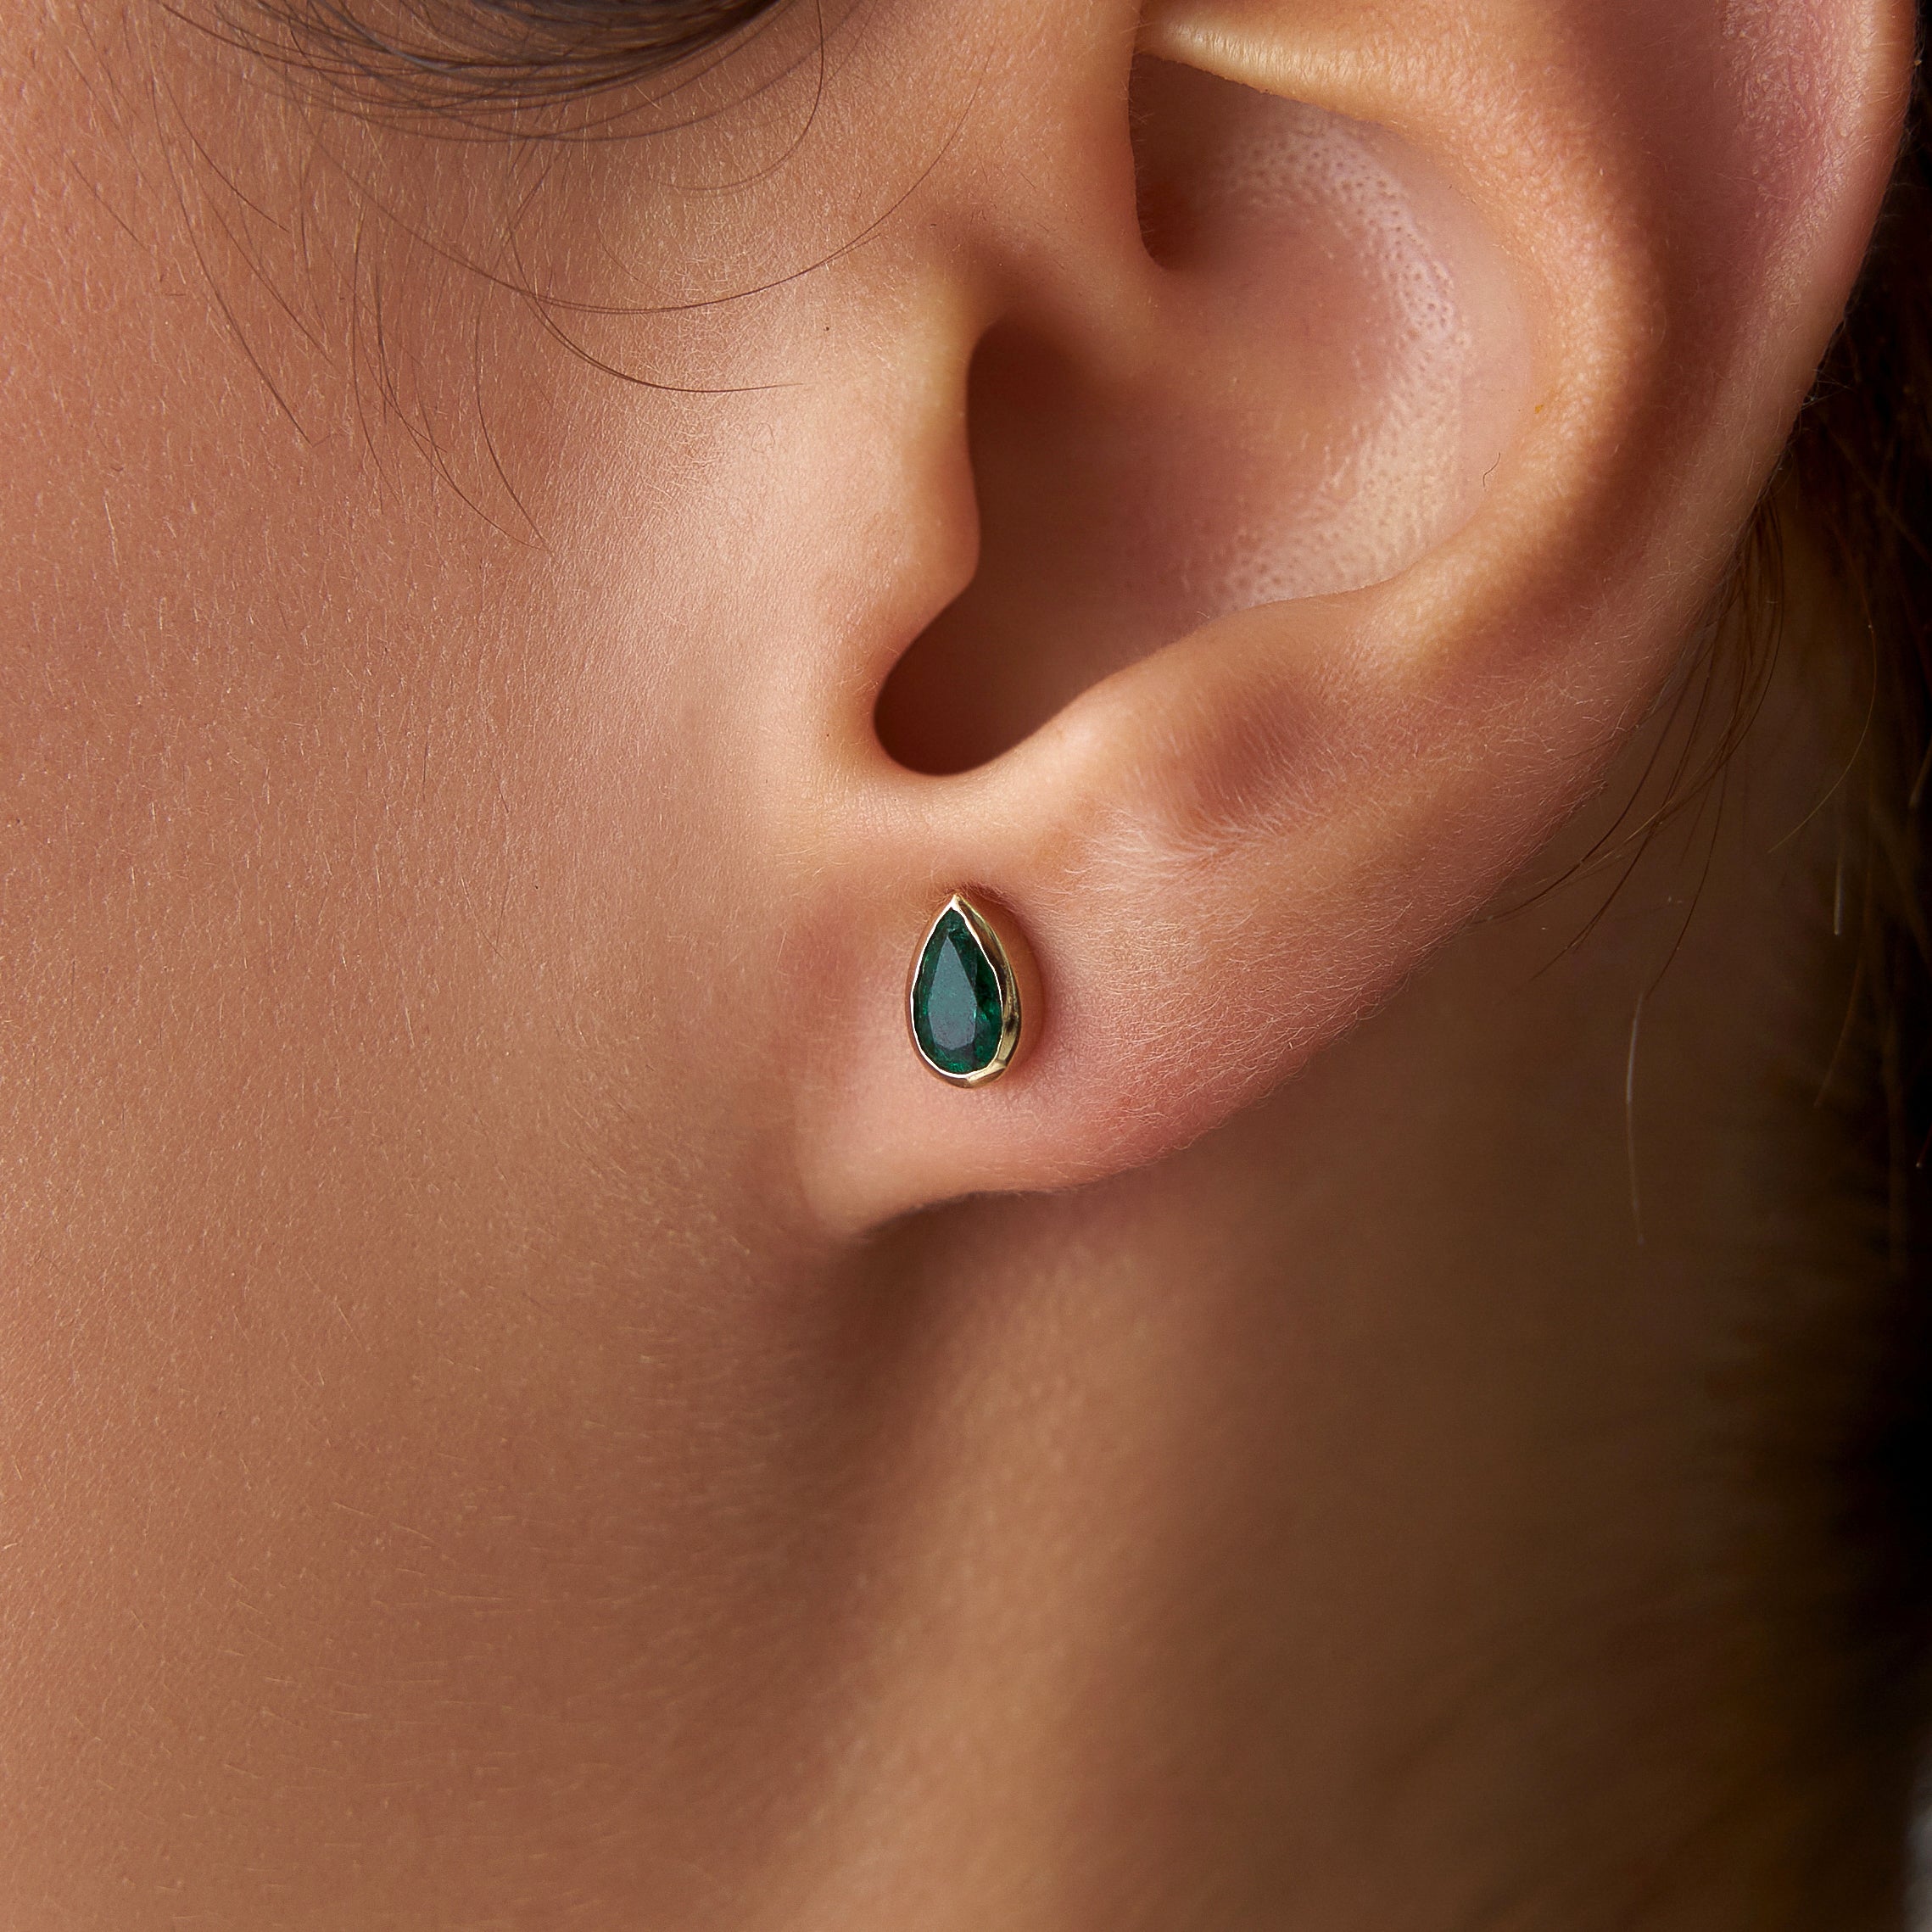 Pear Cut Emerald Studs Available in 14K and 18K Gold